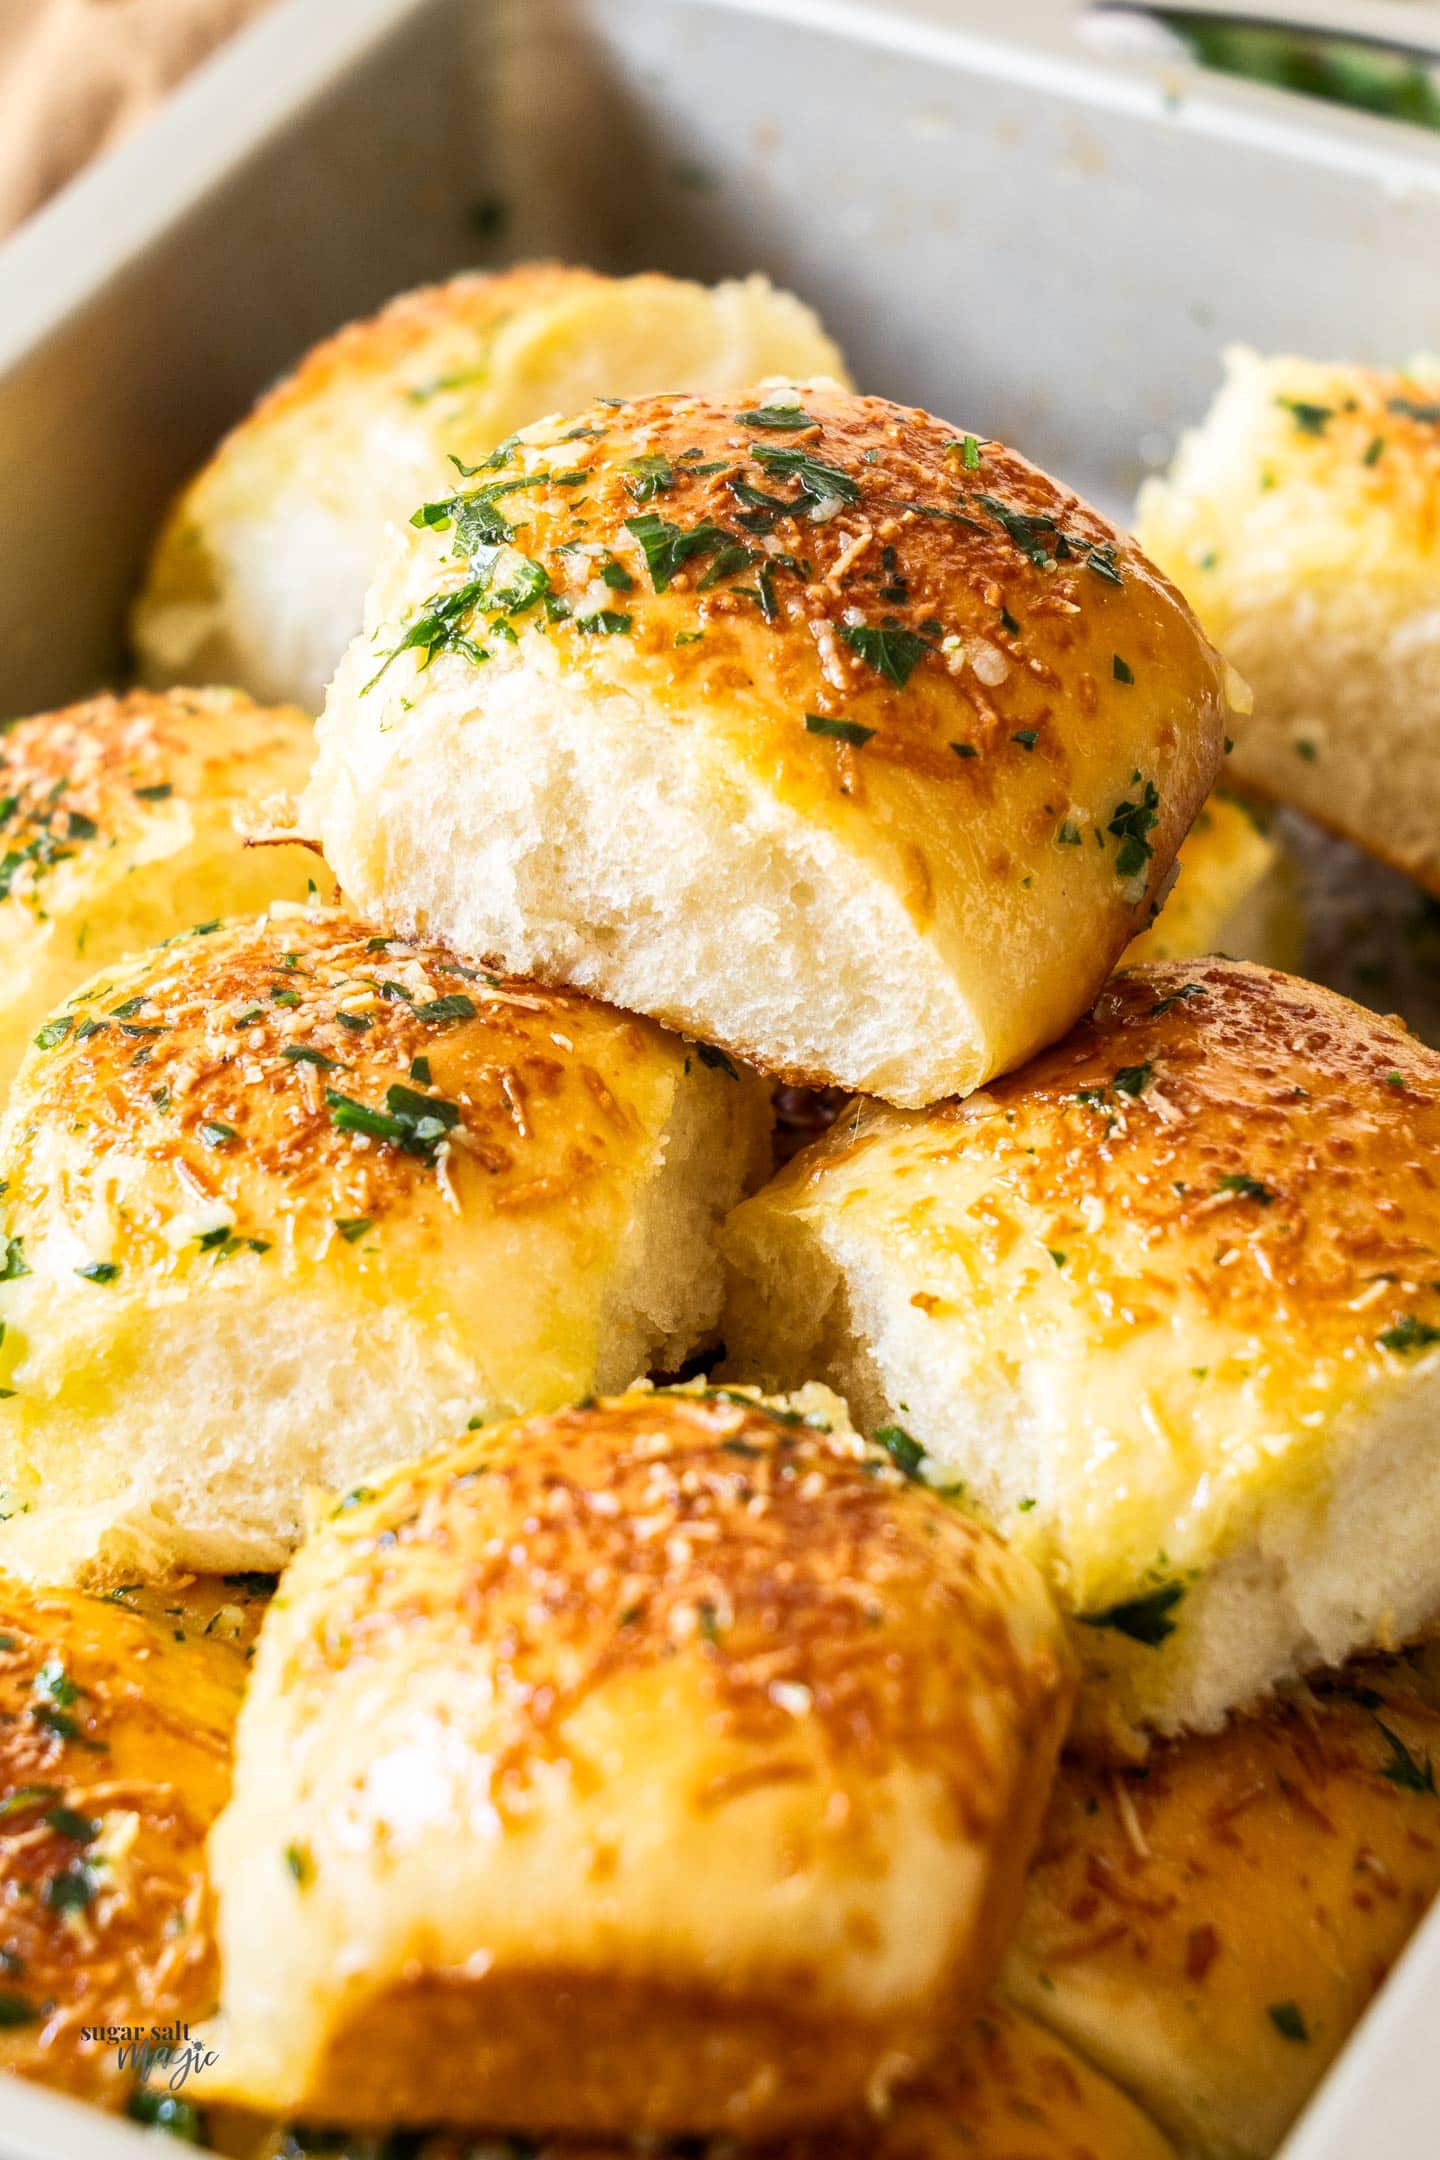 The garlic dinner rolls all piled up in a baking pan.